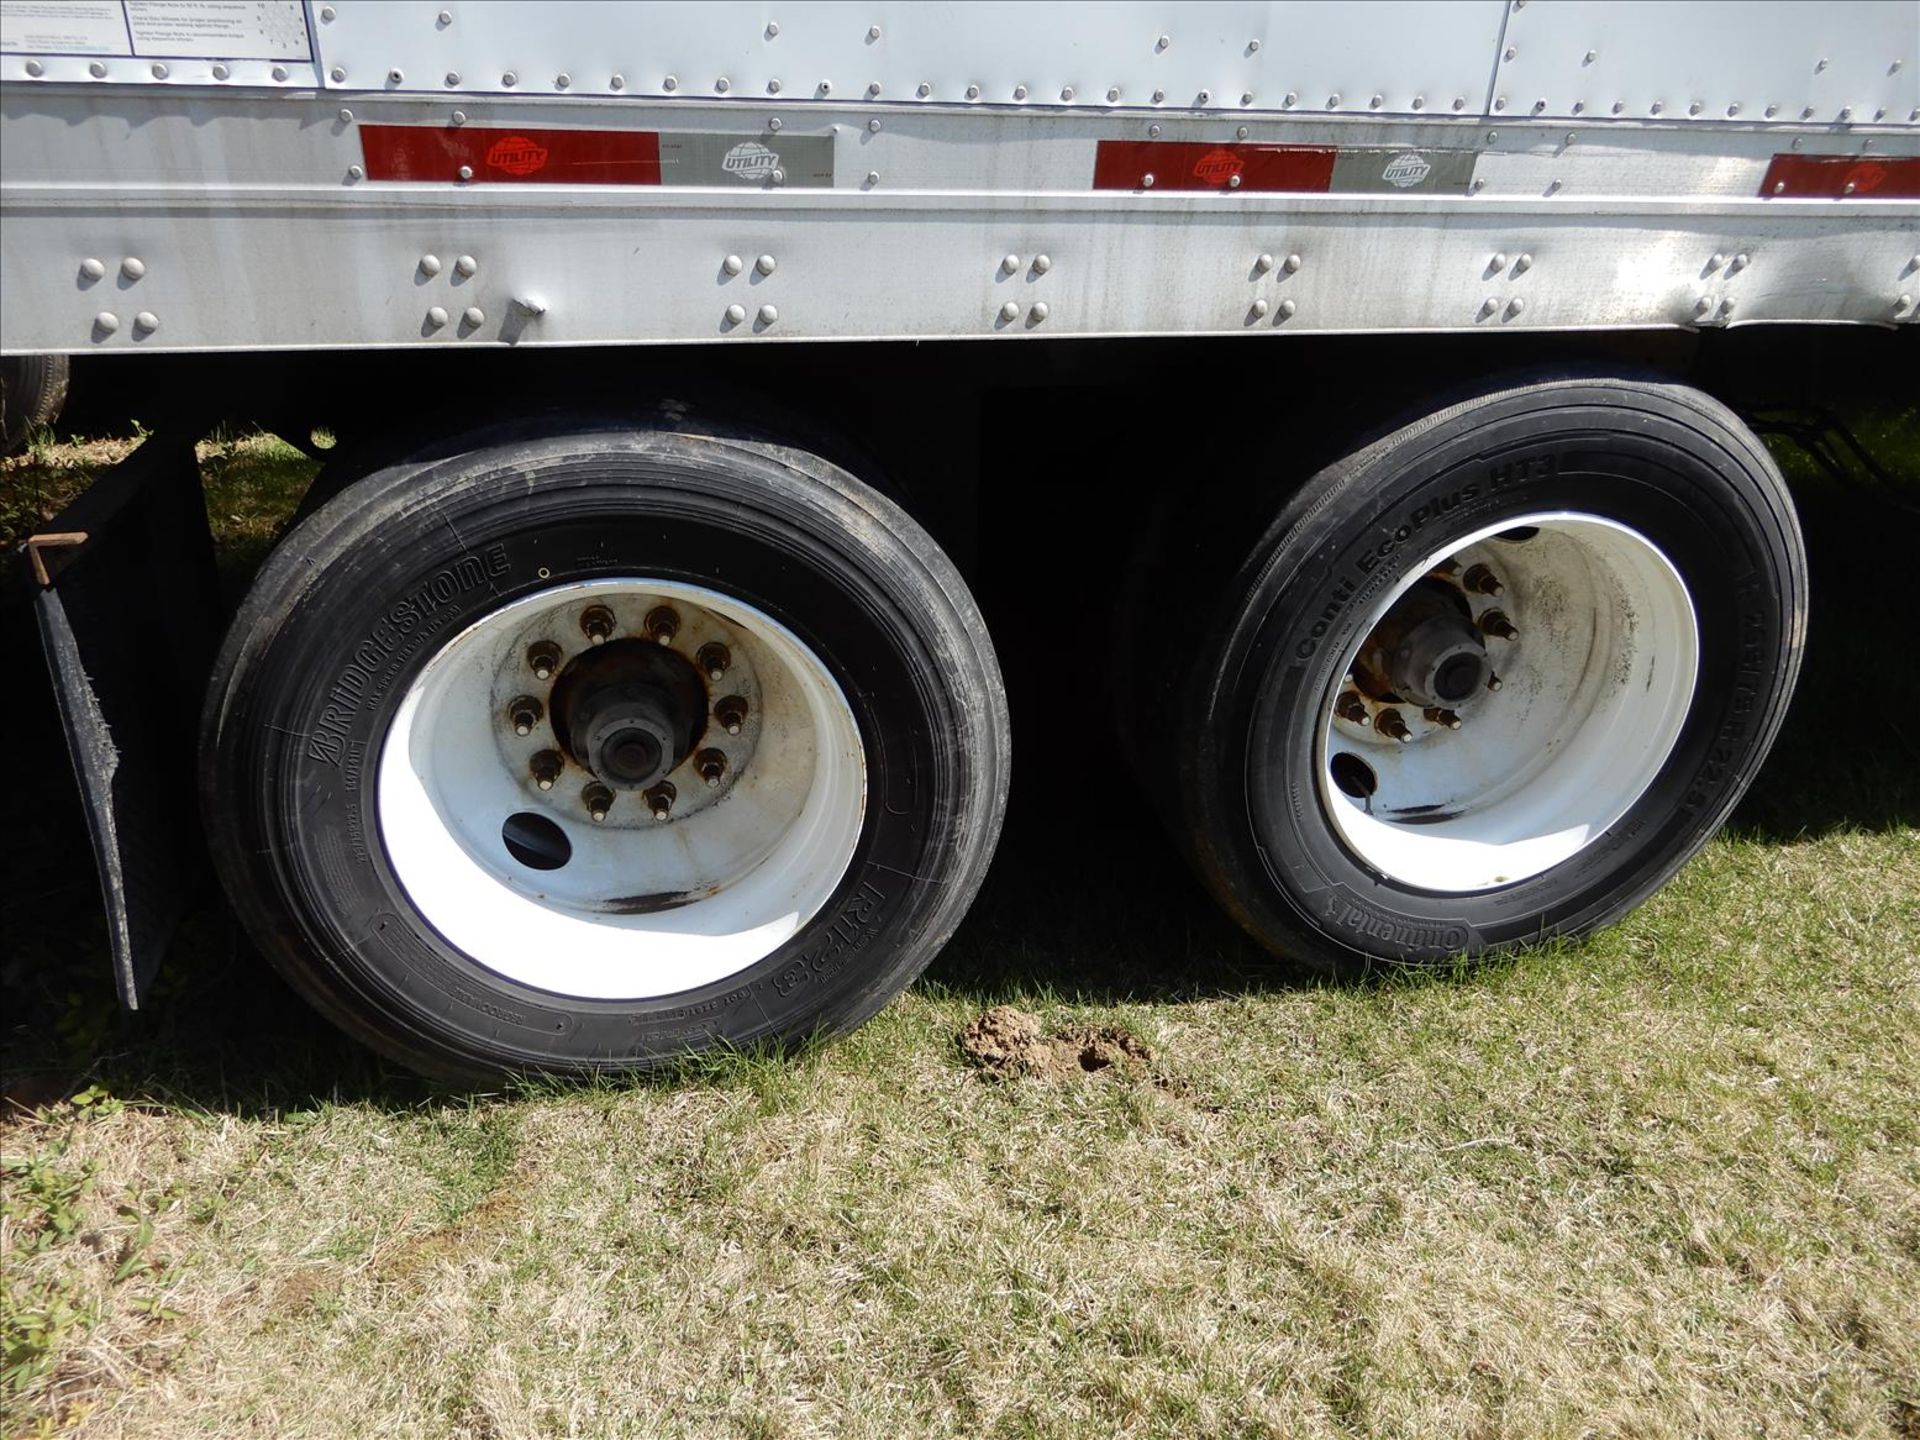 2009 Utility Trailer - Located in Indianapolis, IN - Image 10 of 20